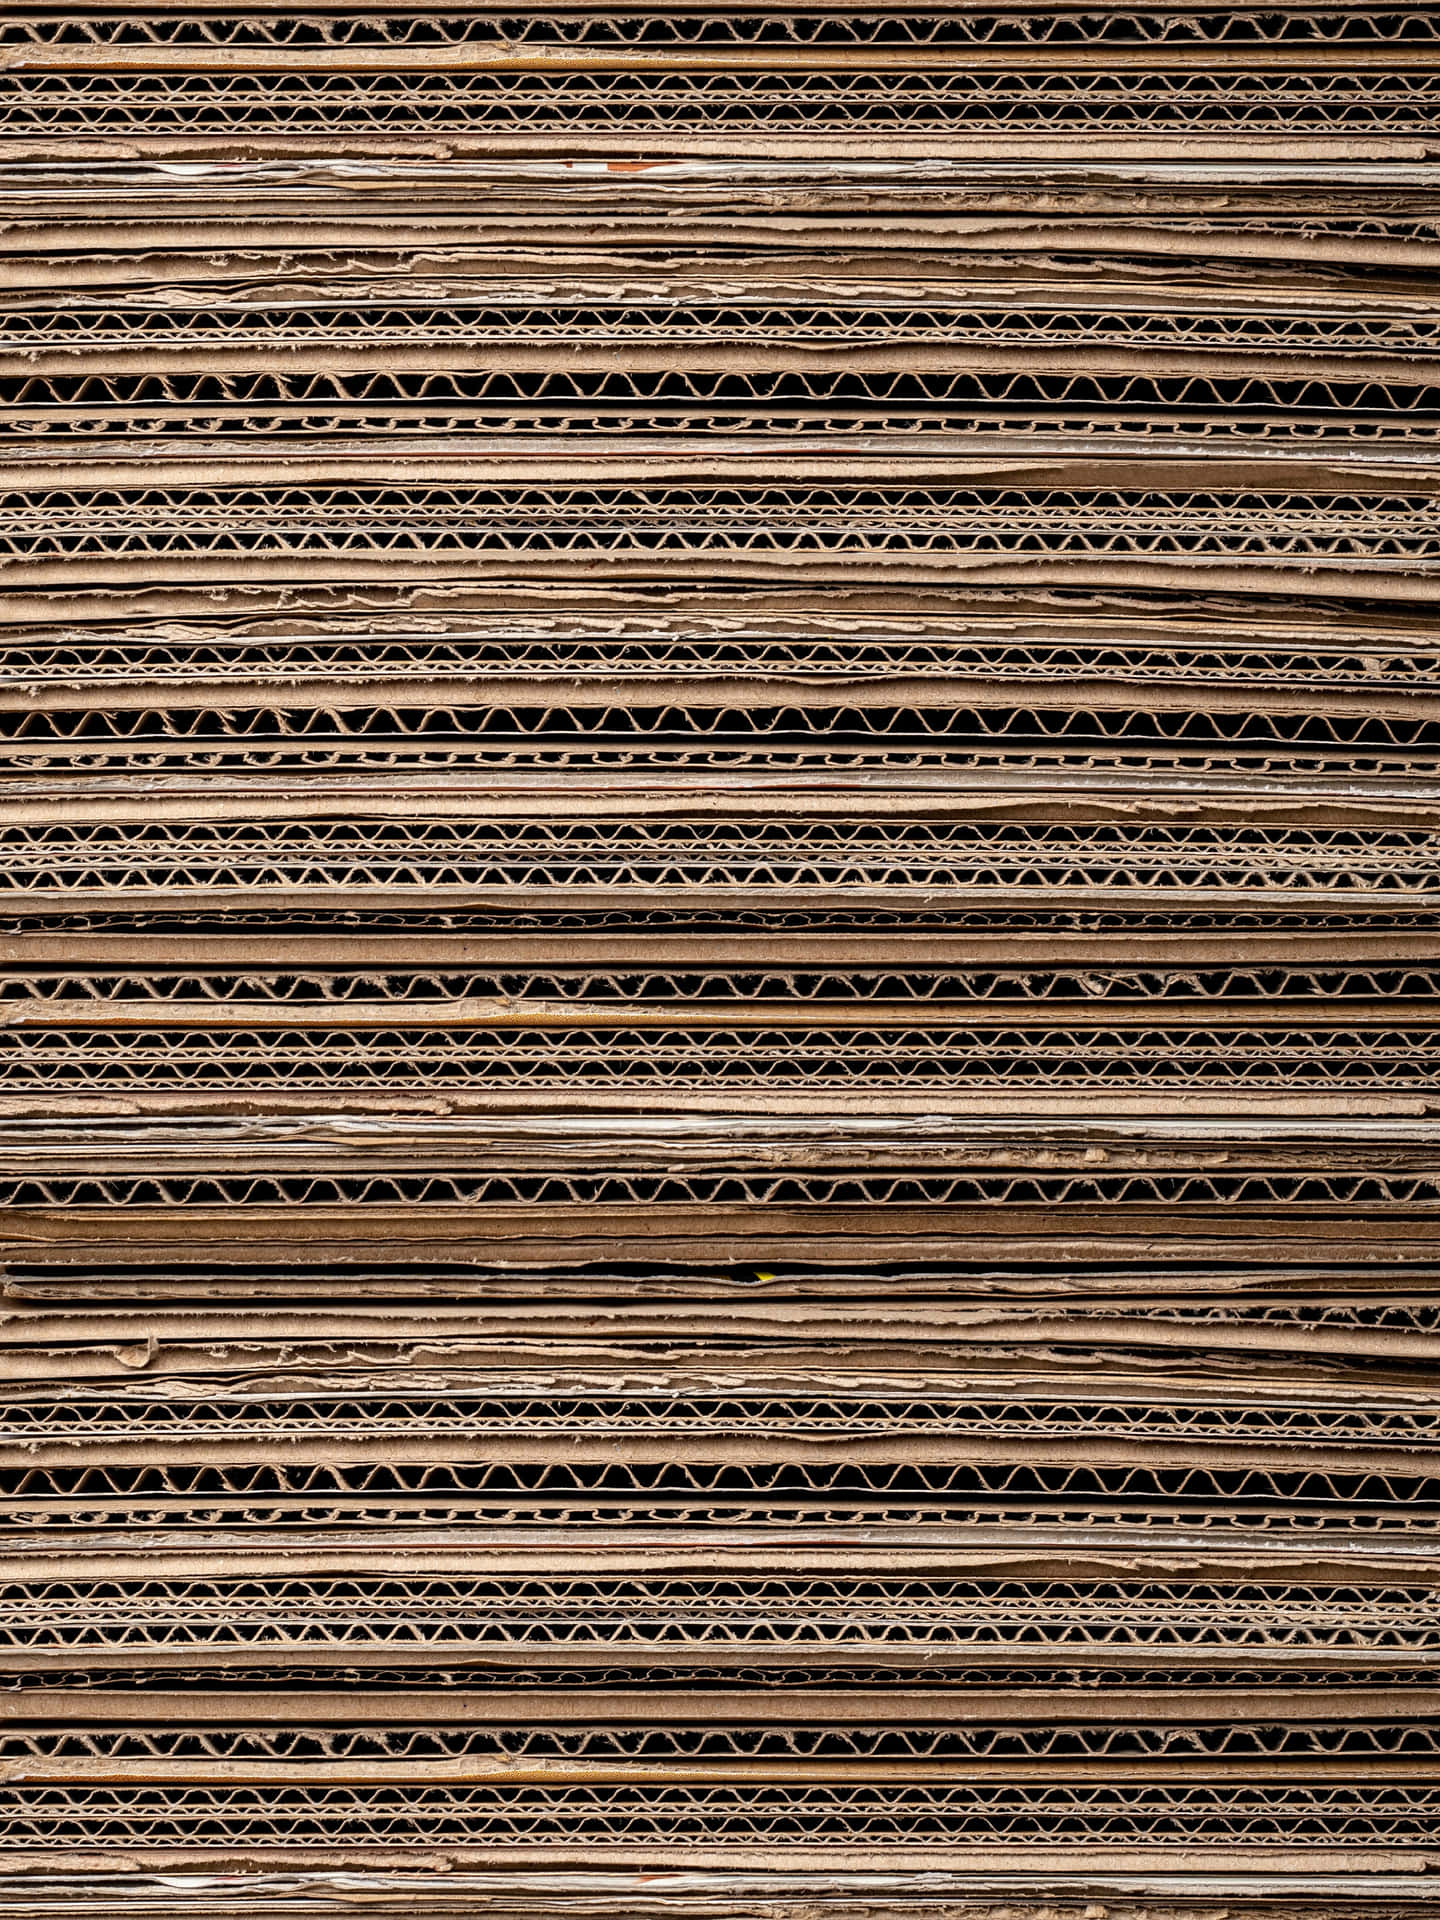 A closer look at a stacked corrugated cardboard background